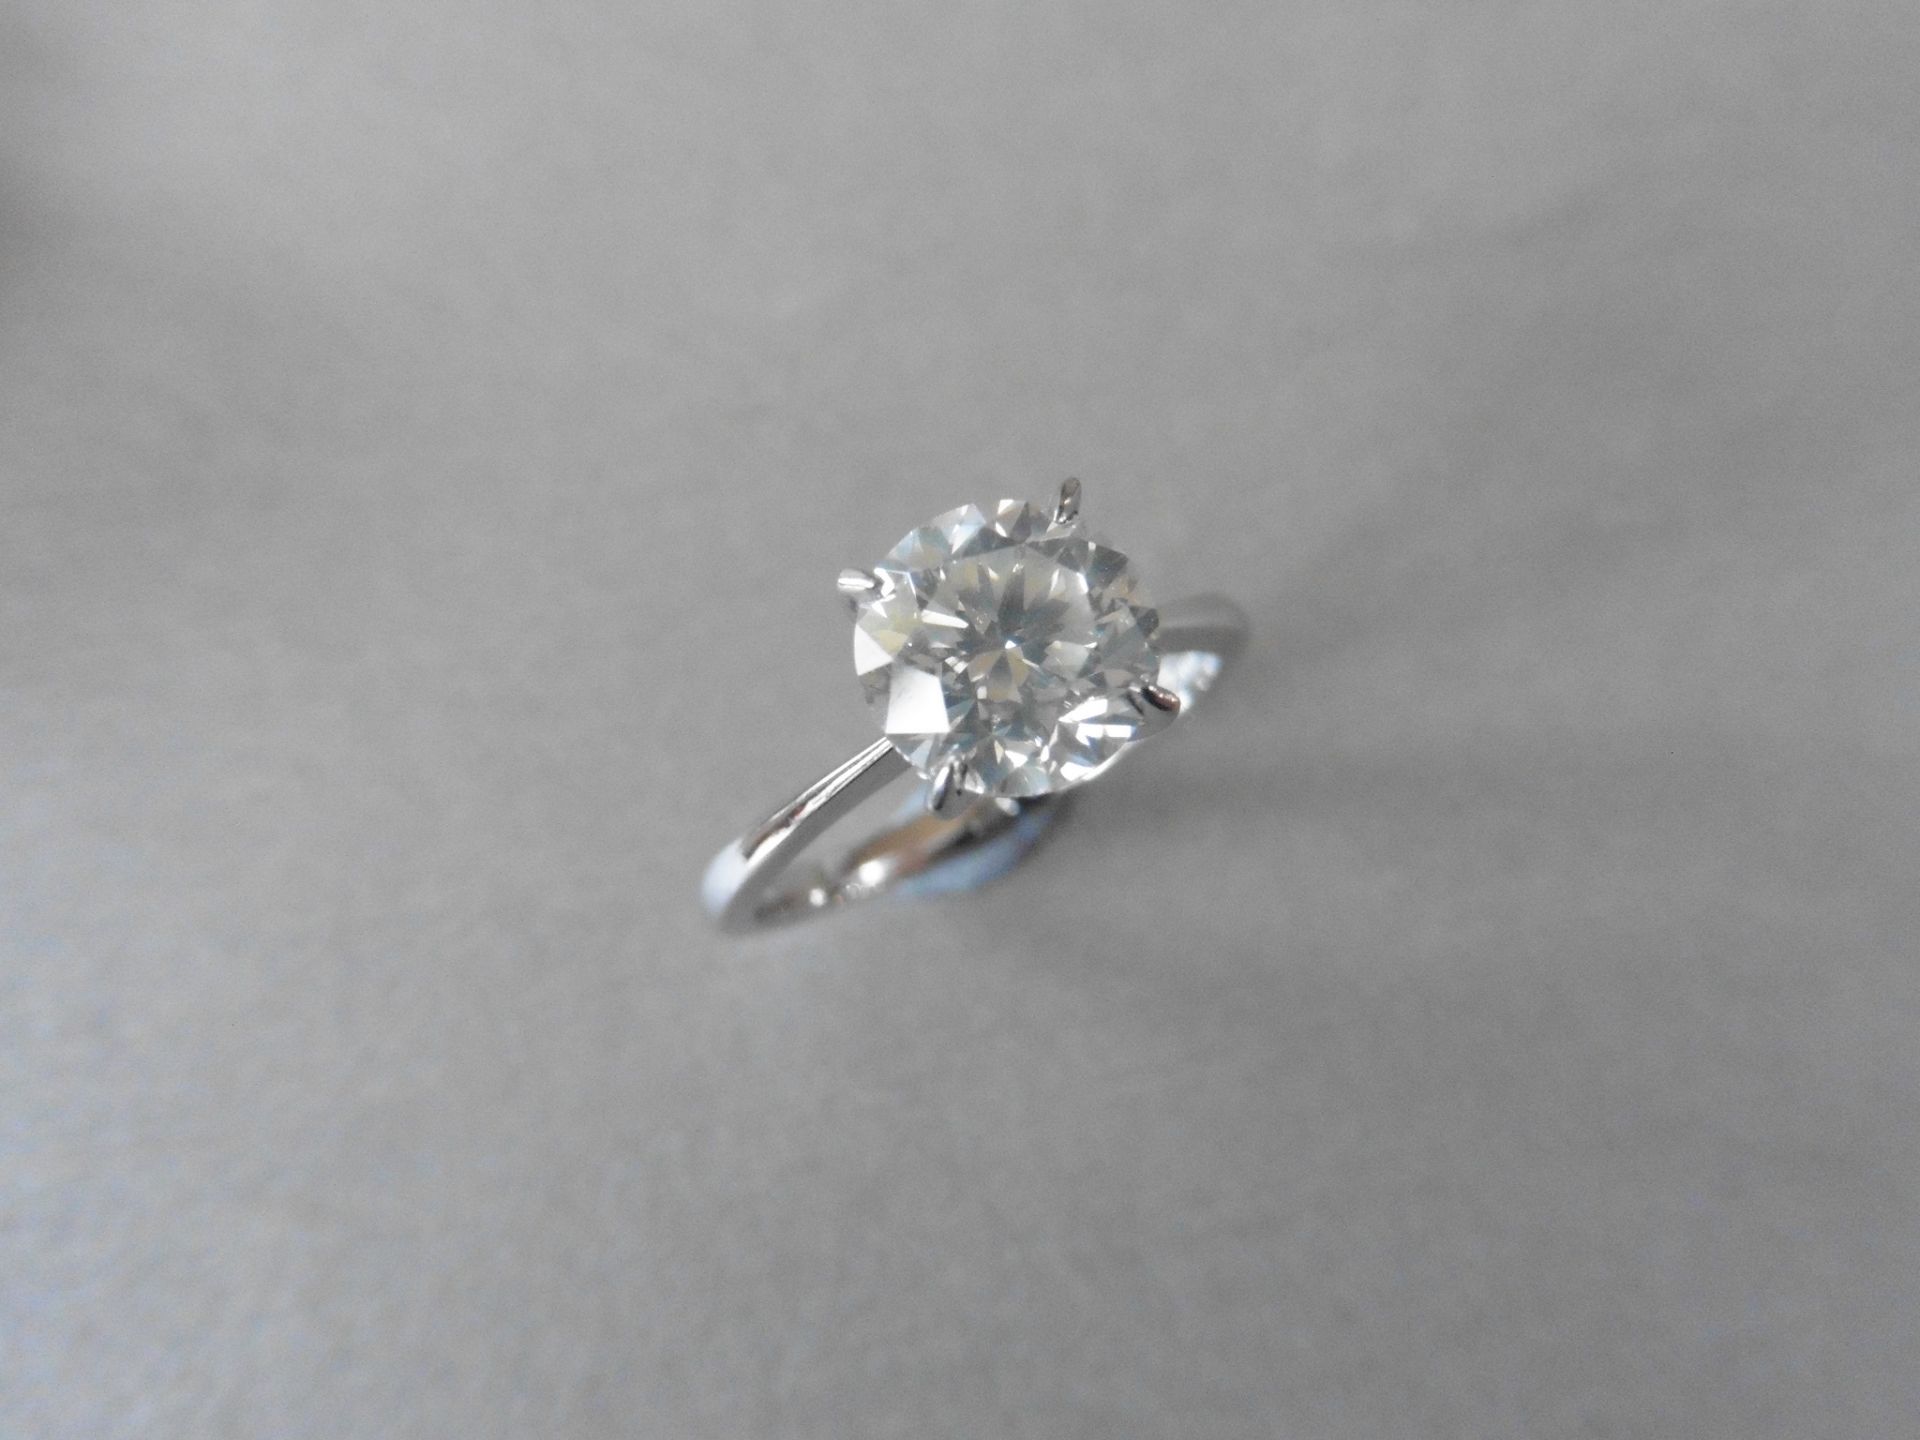 1.51ct diamond solitaire ring. Set in 18ct white gold. F colour si2 clarity. Ring size M. Hallmarked